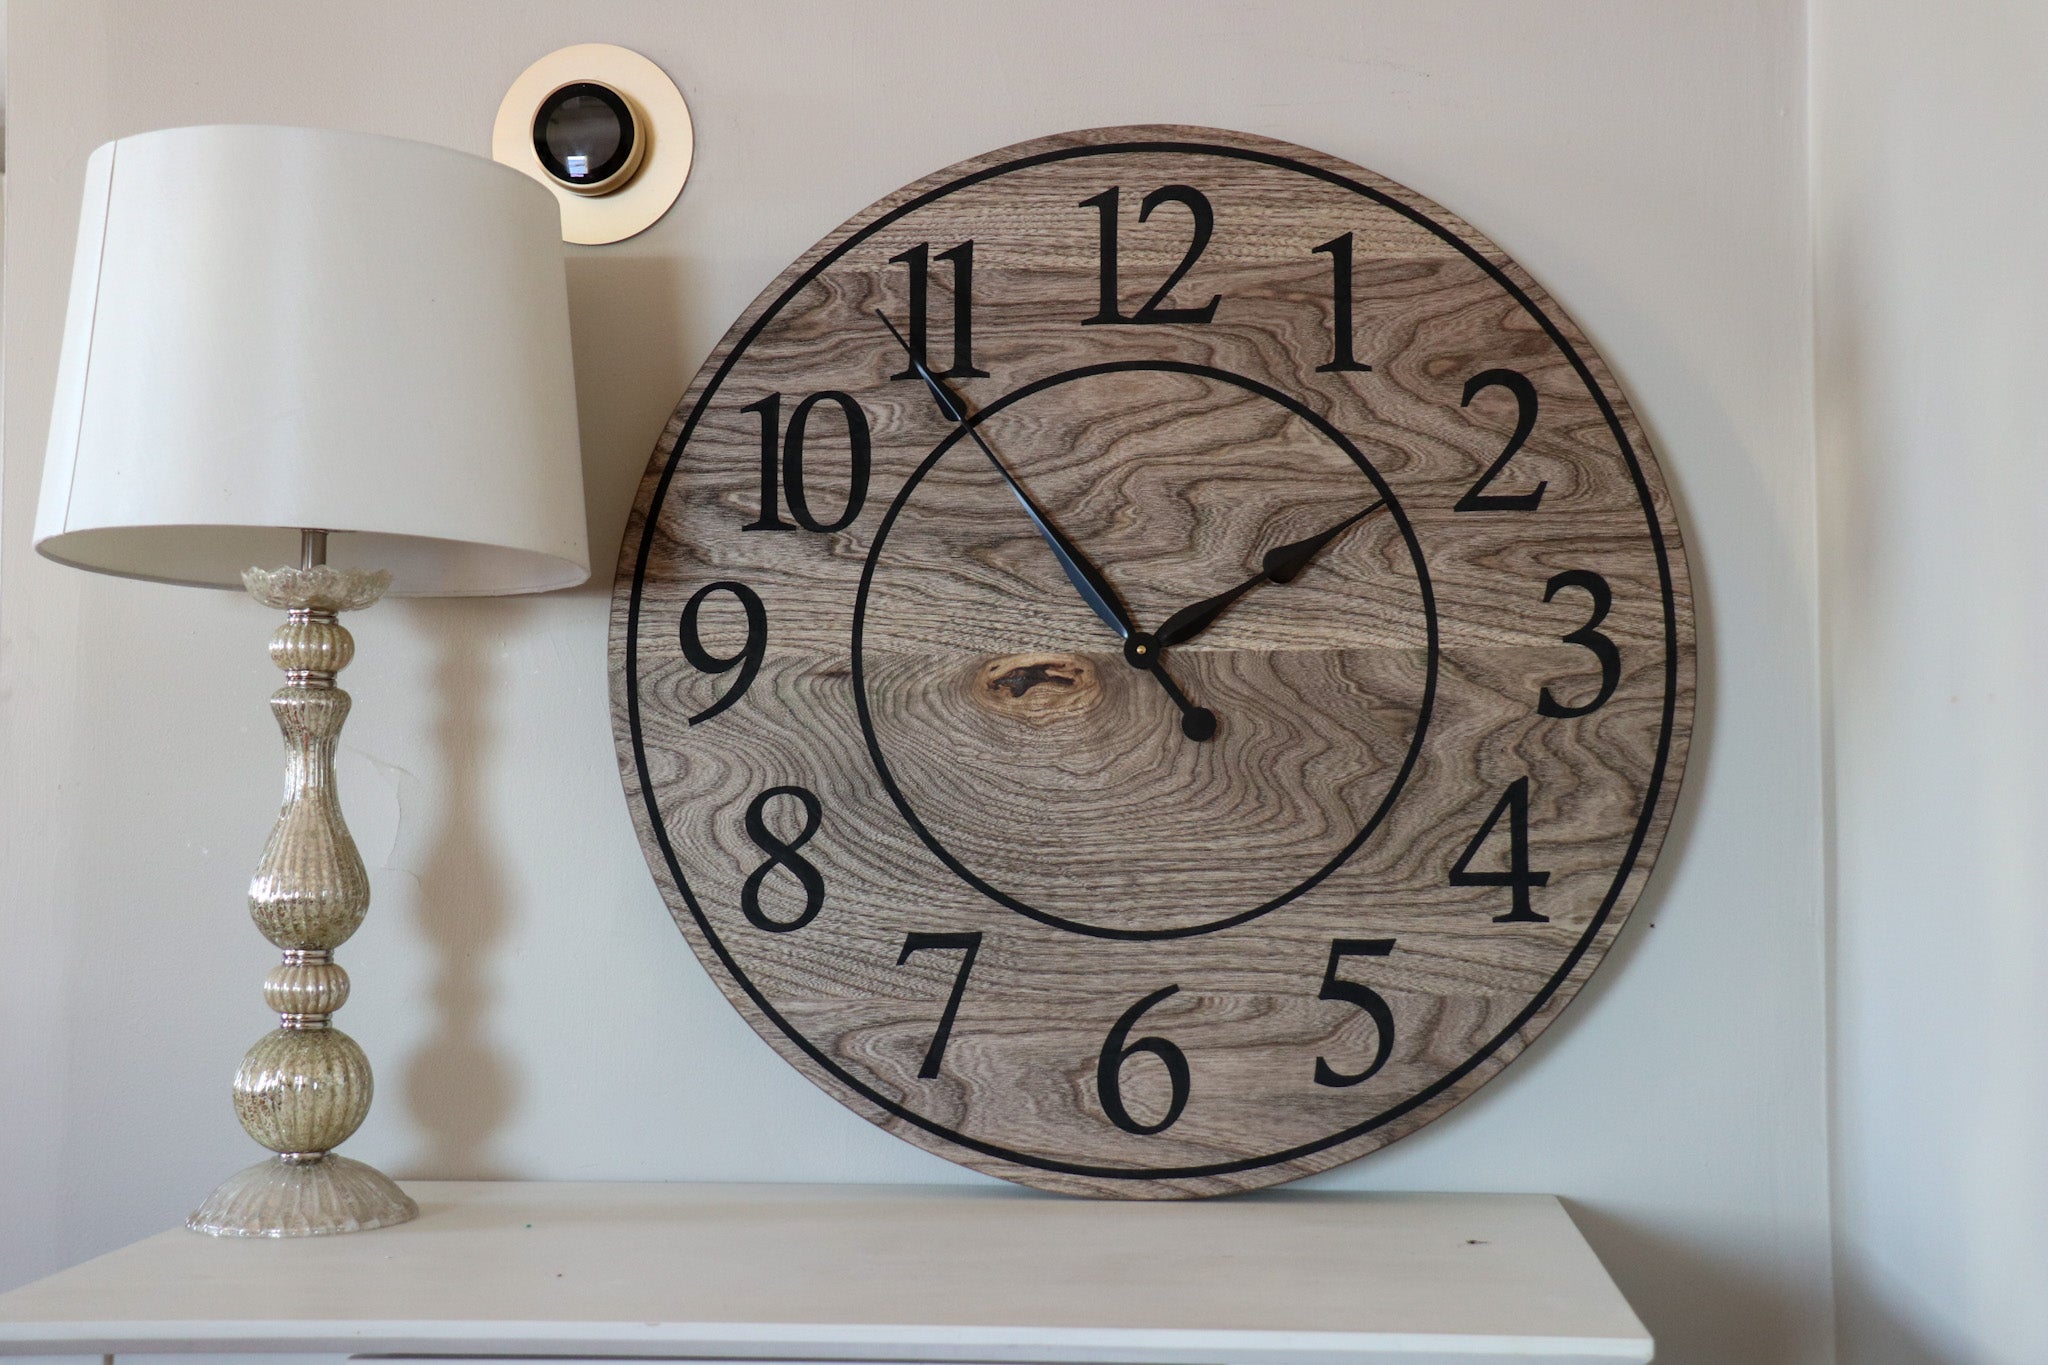 Large Brown Stained Hackberry Wall Clock with Black Numbers - Hazel Oak Farms Handmade Furniture in Iowa, USA